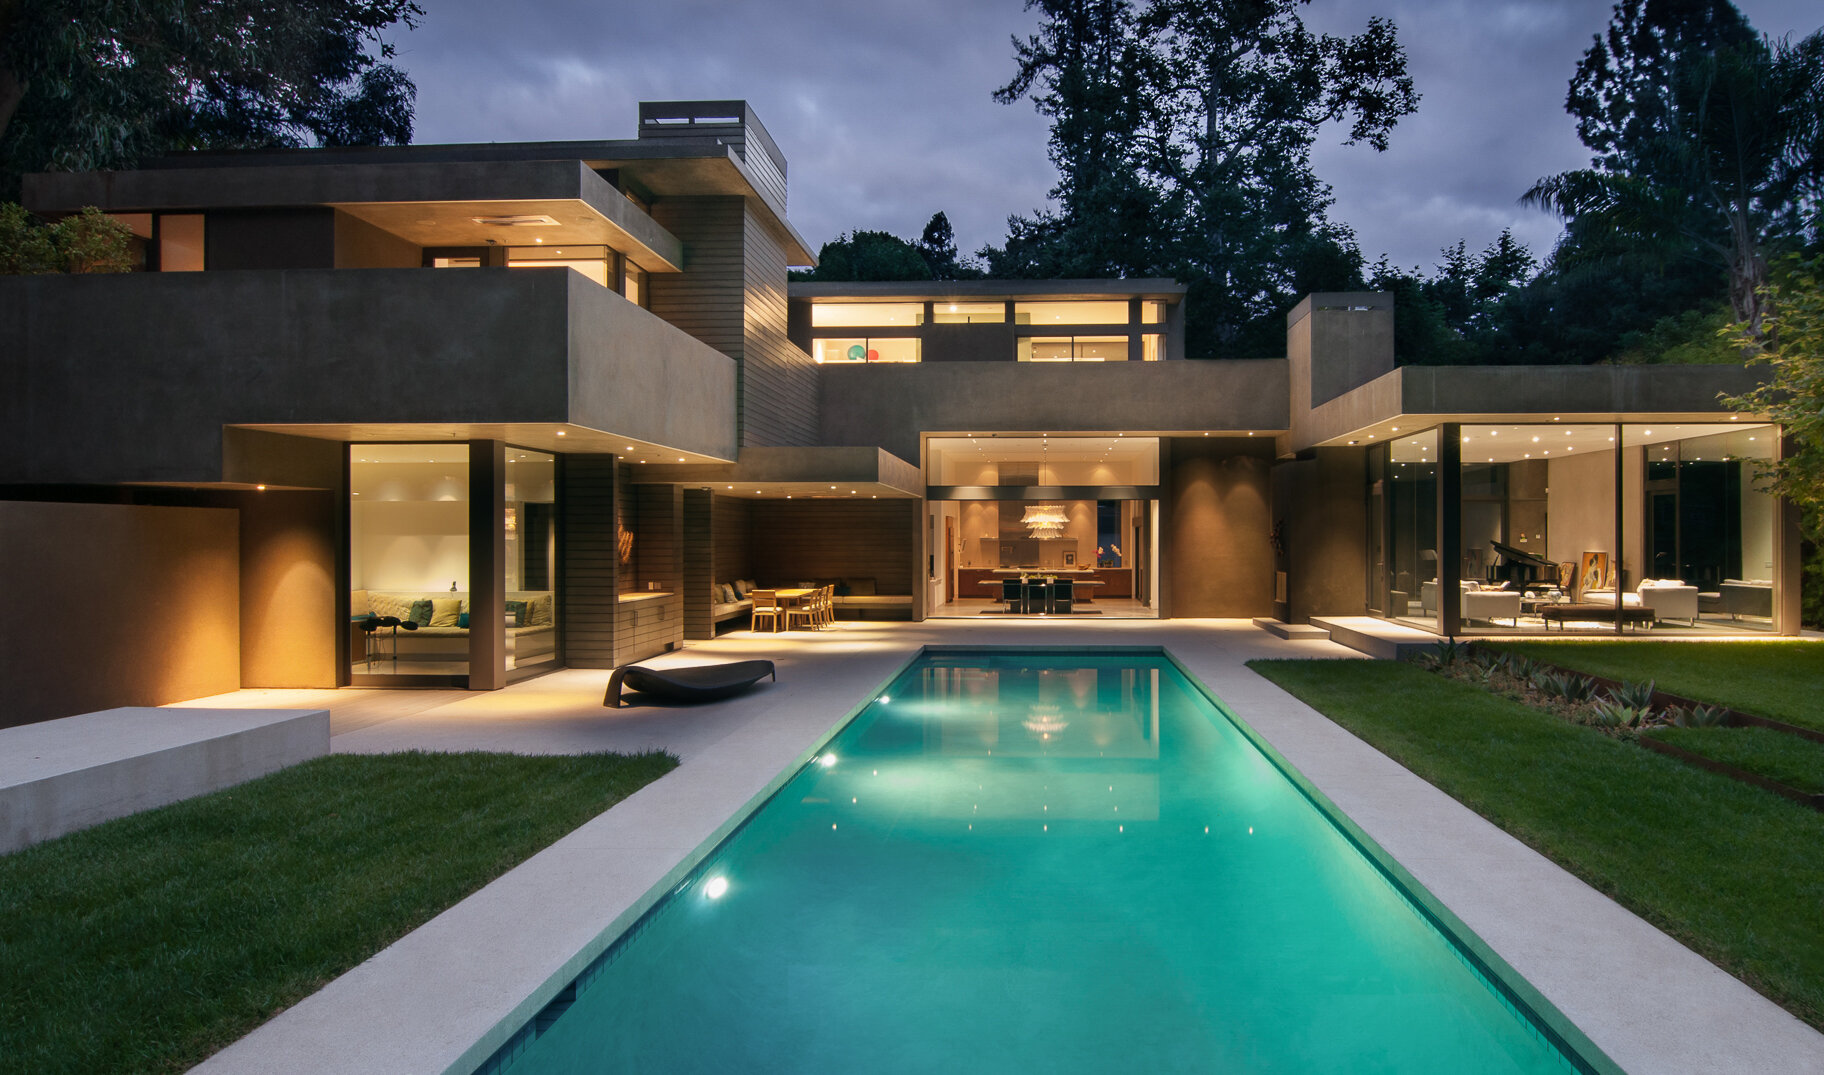  Top best luxury general contracting company modern home in a canyon neighborhood of Los Angeles featuring iconic design by architect Chu and Gooding with floor to ceiling glass windows, open floor plan, minimal pool, architectural quality.  